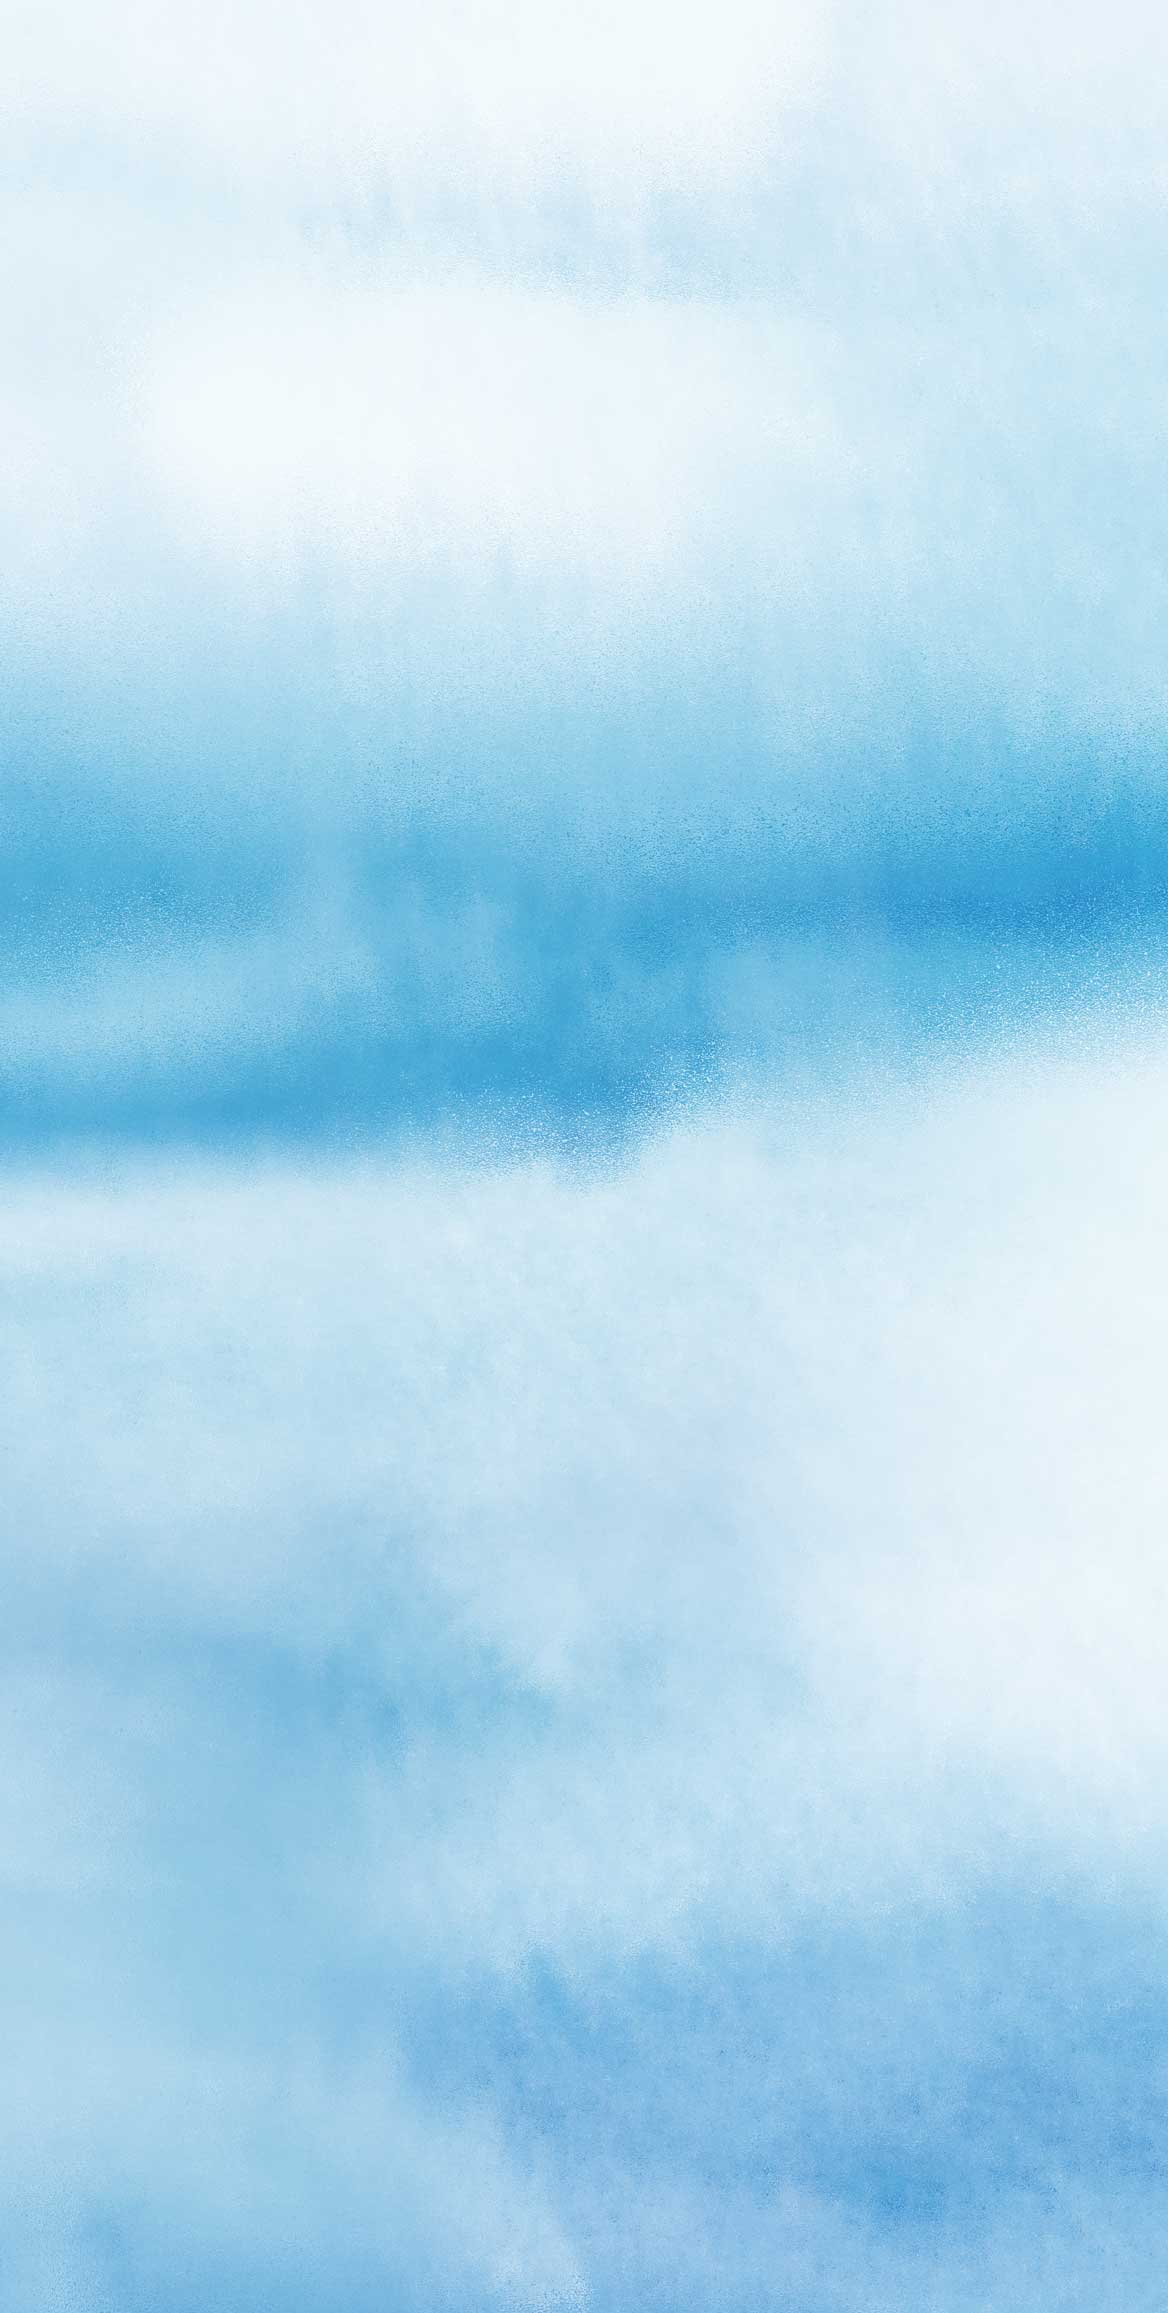 Blue Abstract Sky Wallpaper Mural pattern image